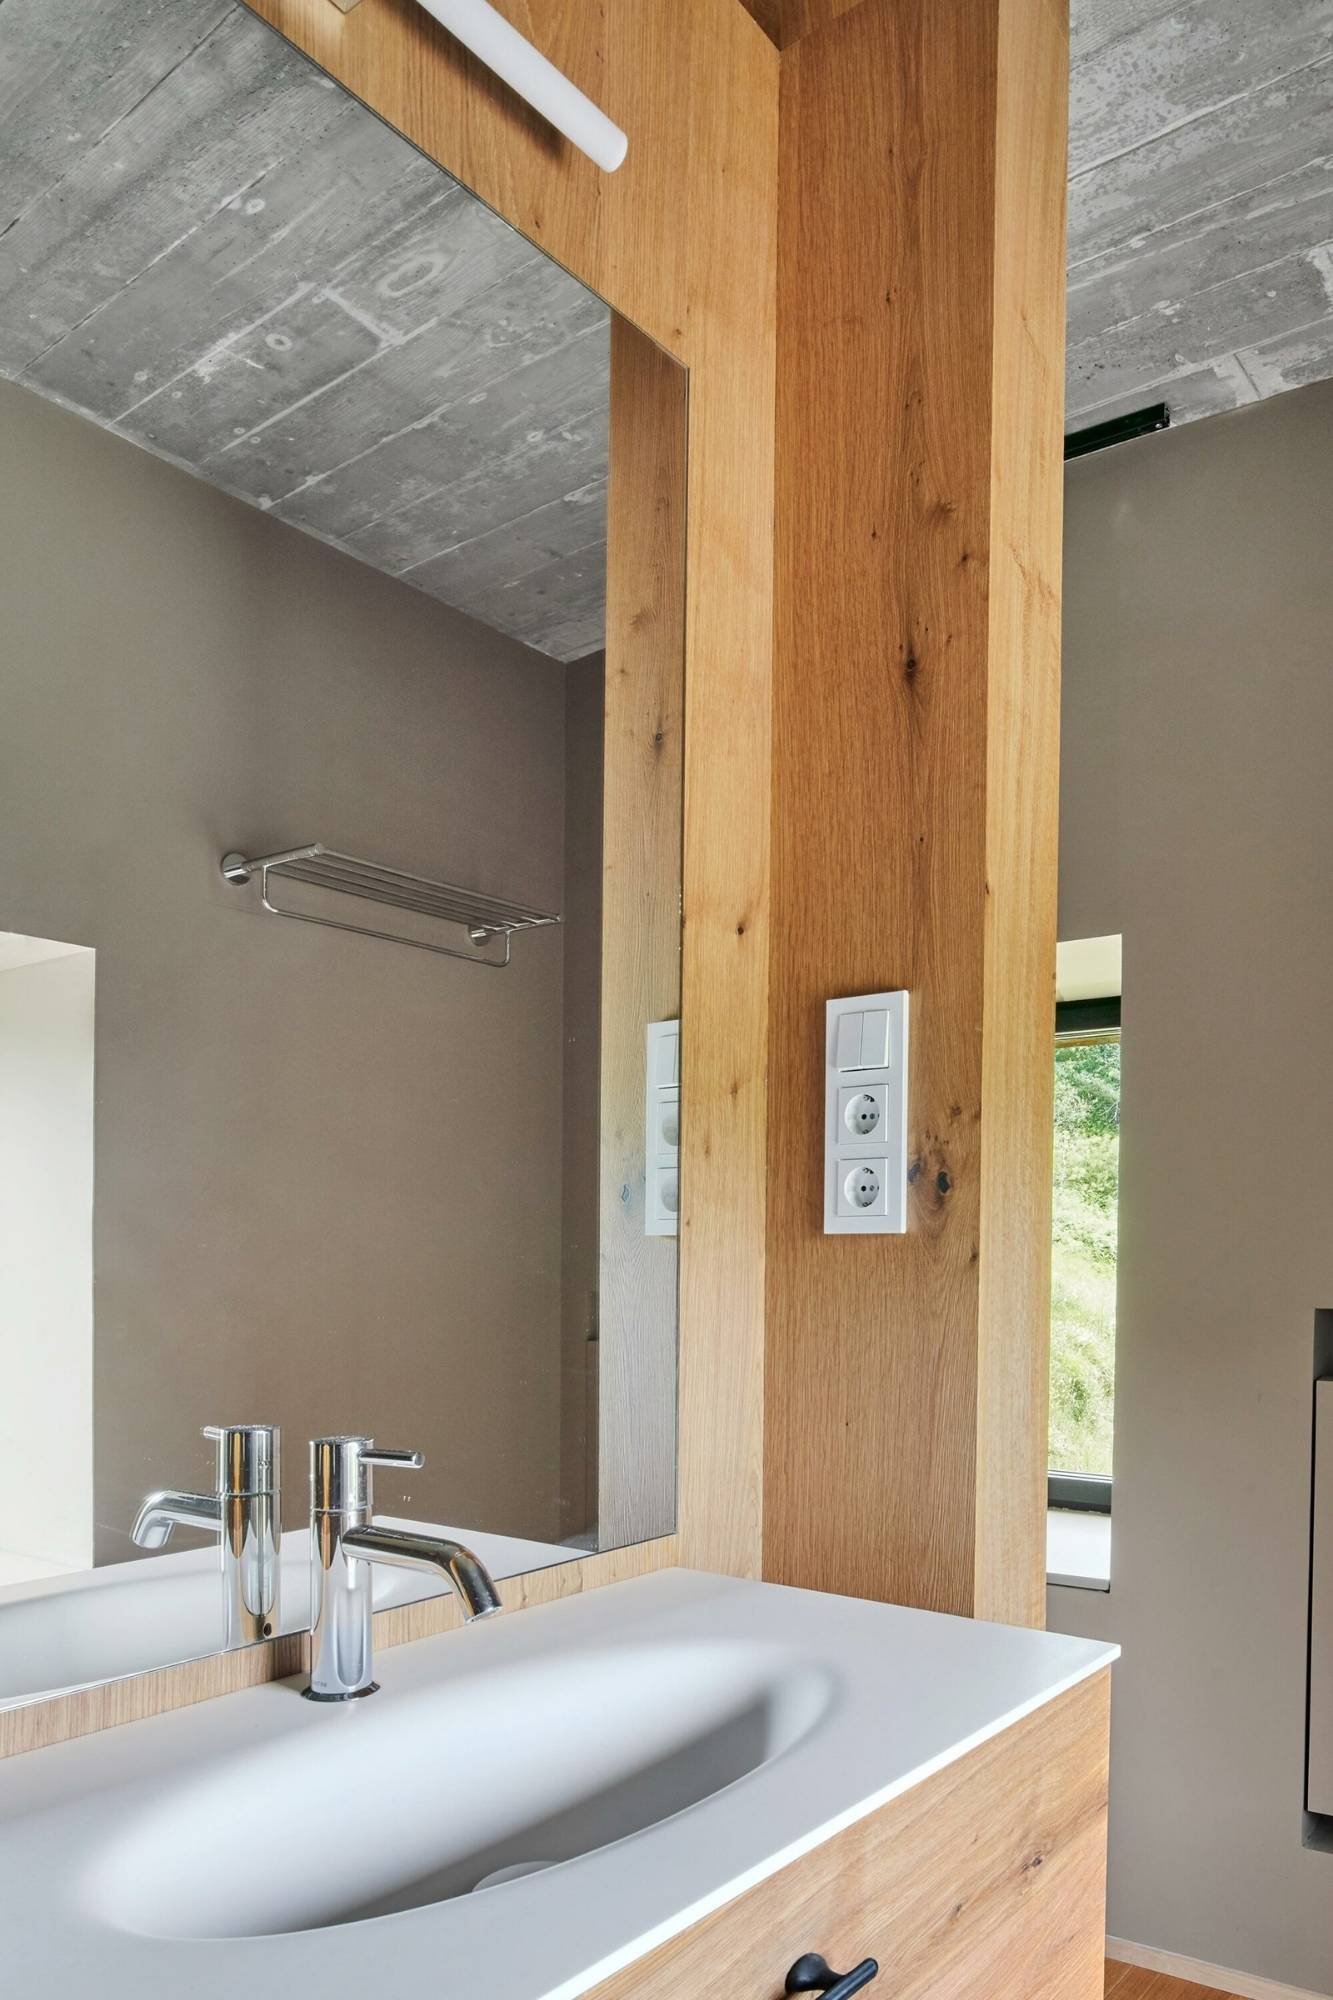 wood products, Water-Resistant Wood Coverings on Floors, Bathrooms, and Shower Stalls